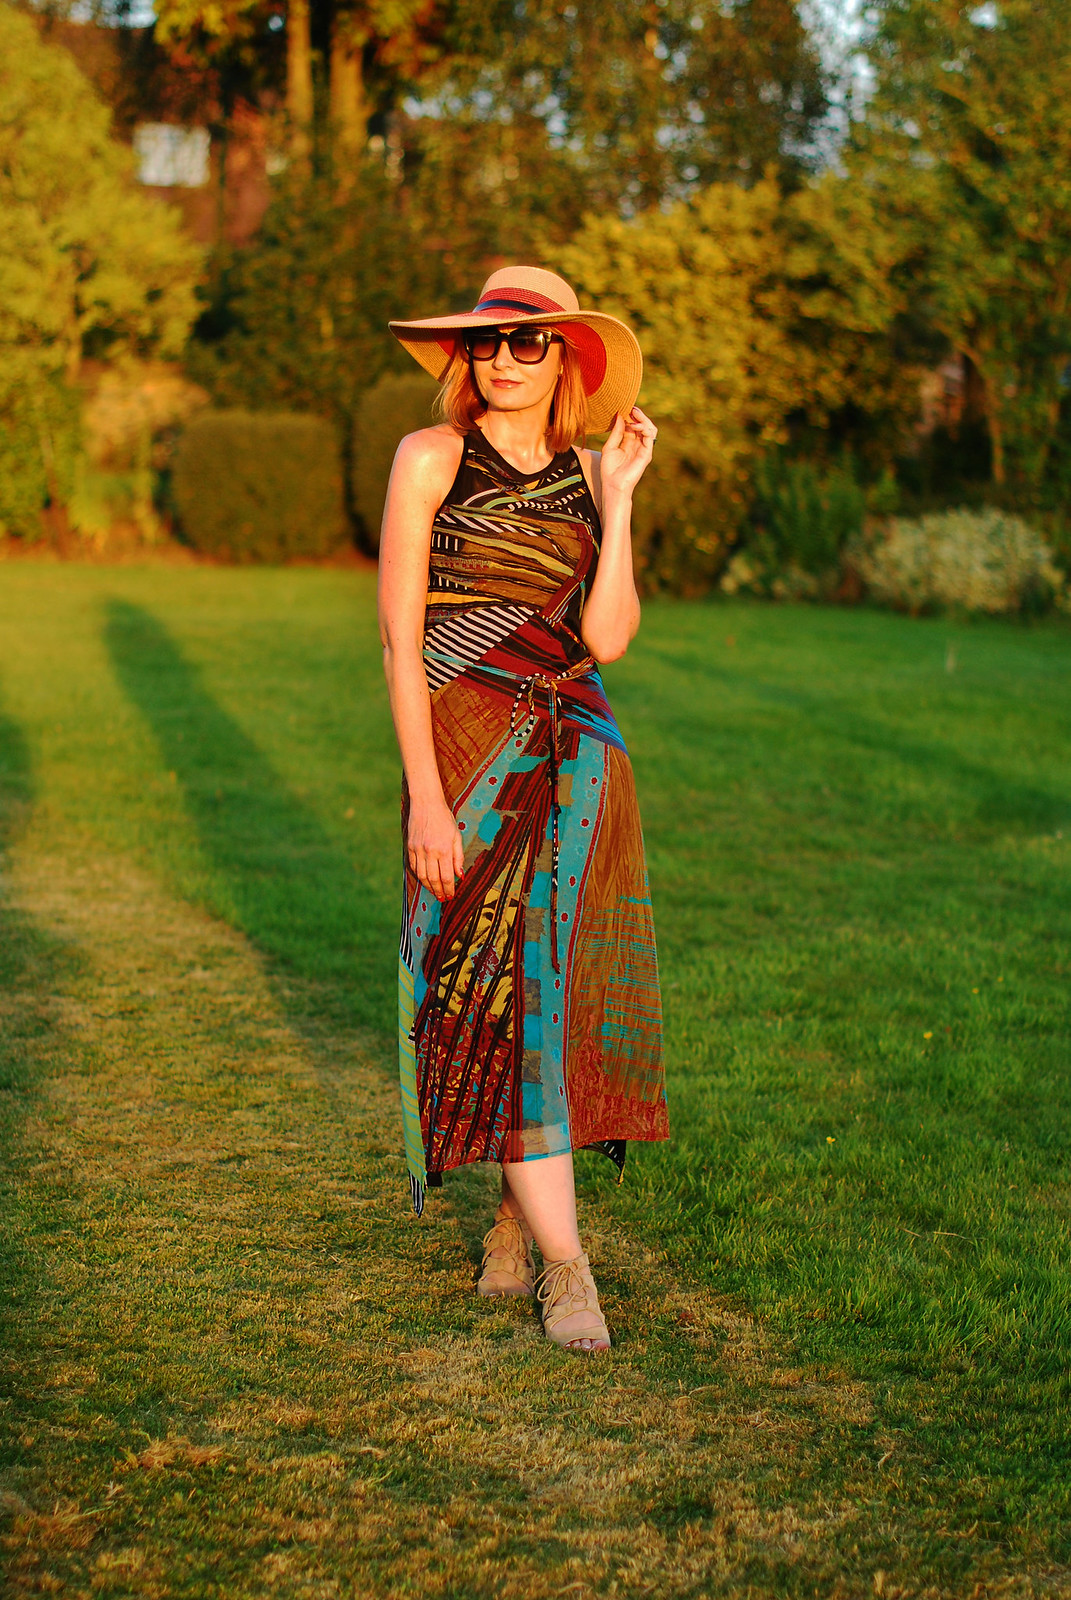 Easy summer dressing: Tribal-print maxi dress, wide-brimmed floppy hat | Not Dressed As Lamb, over 40 style